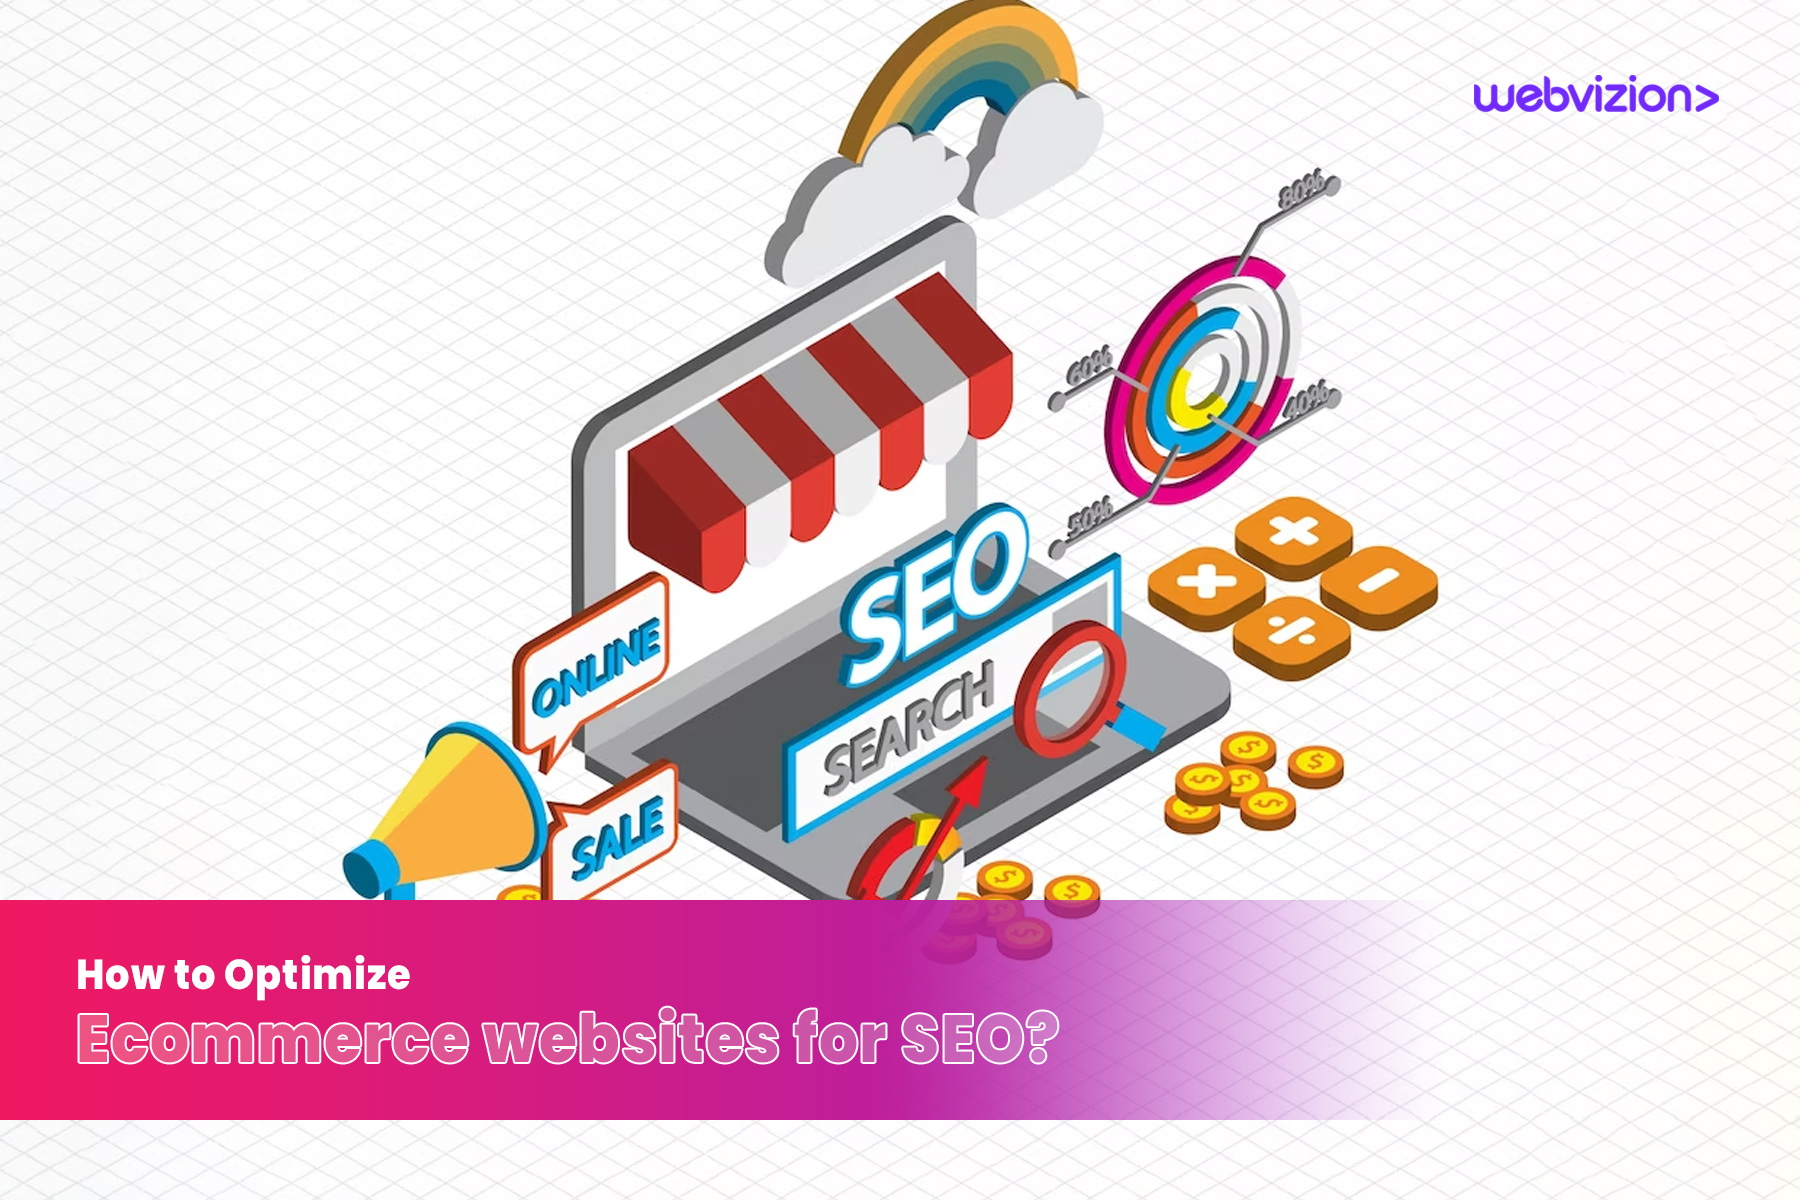 How-to-Optimize-Ecommerce-websites-for-SEO-Webvizion-Global